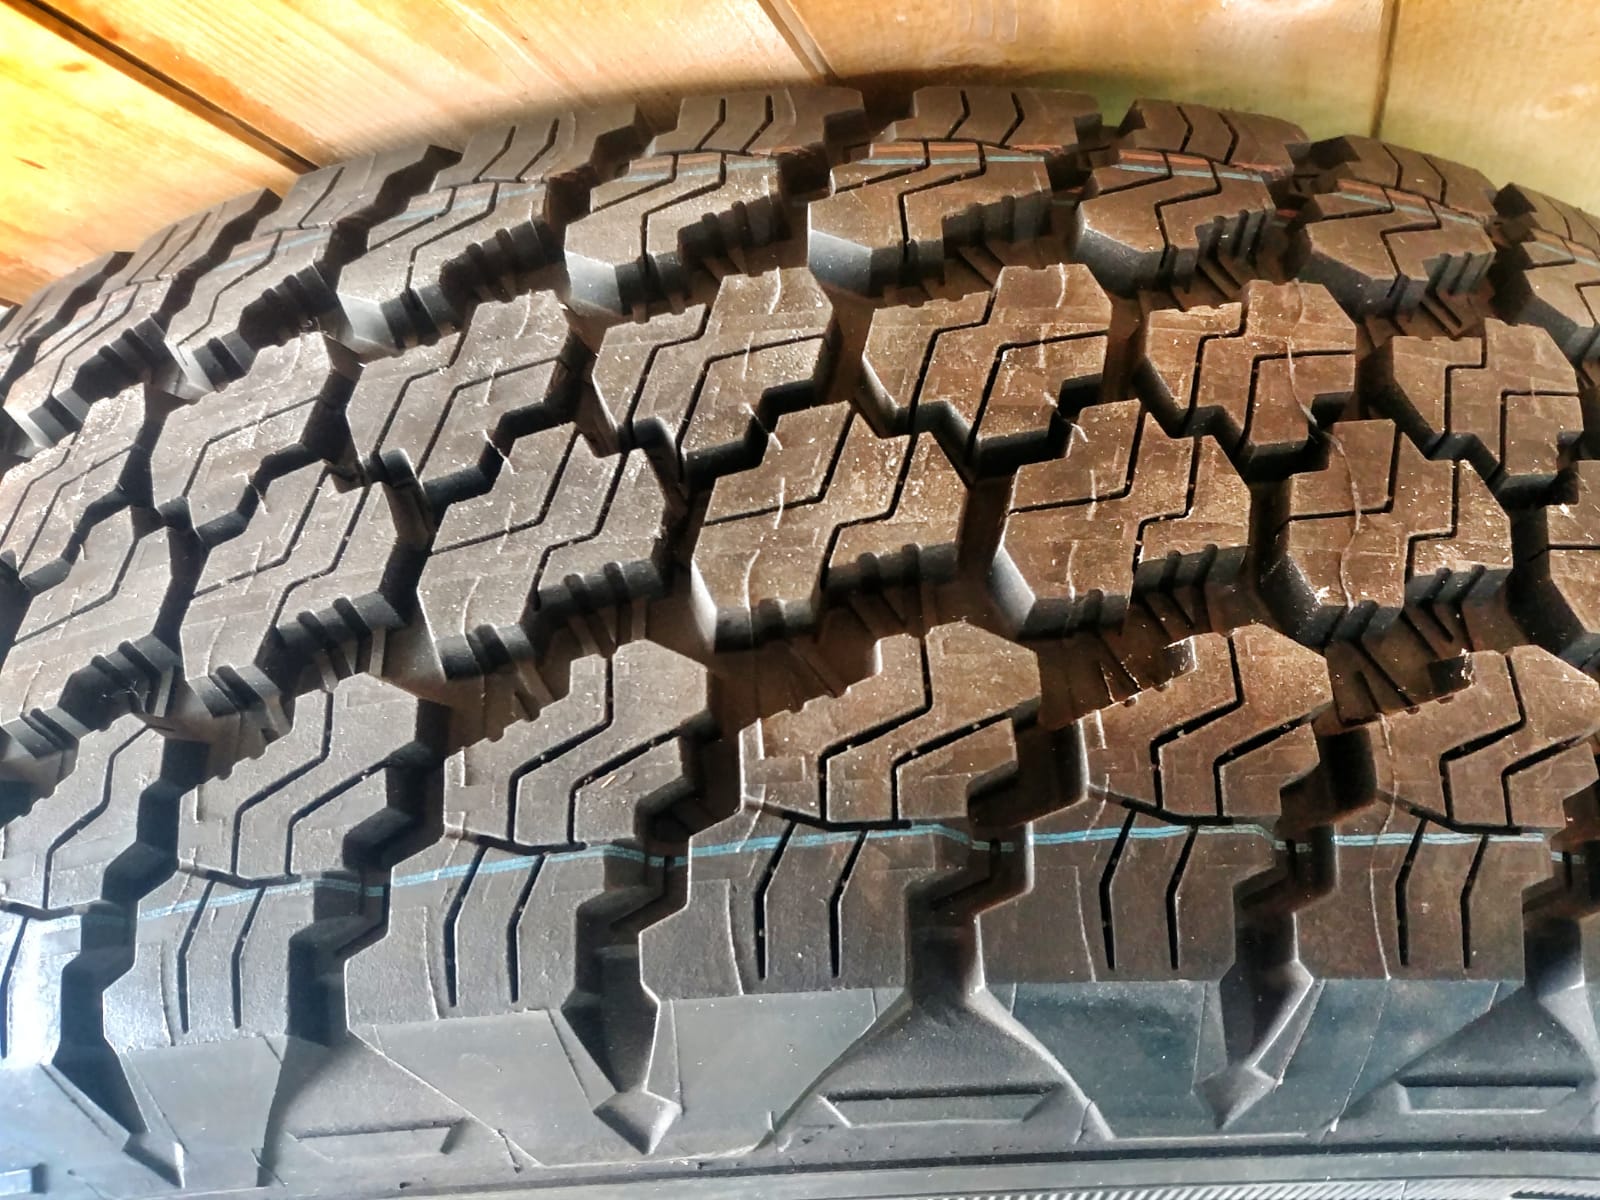 Gomme Goodyear Wrangler Nuove 245/75R17 – American Wild Wheels